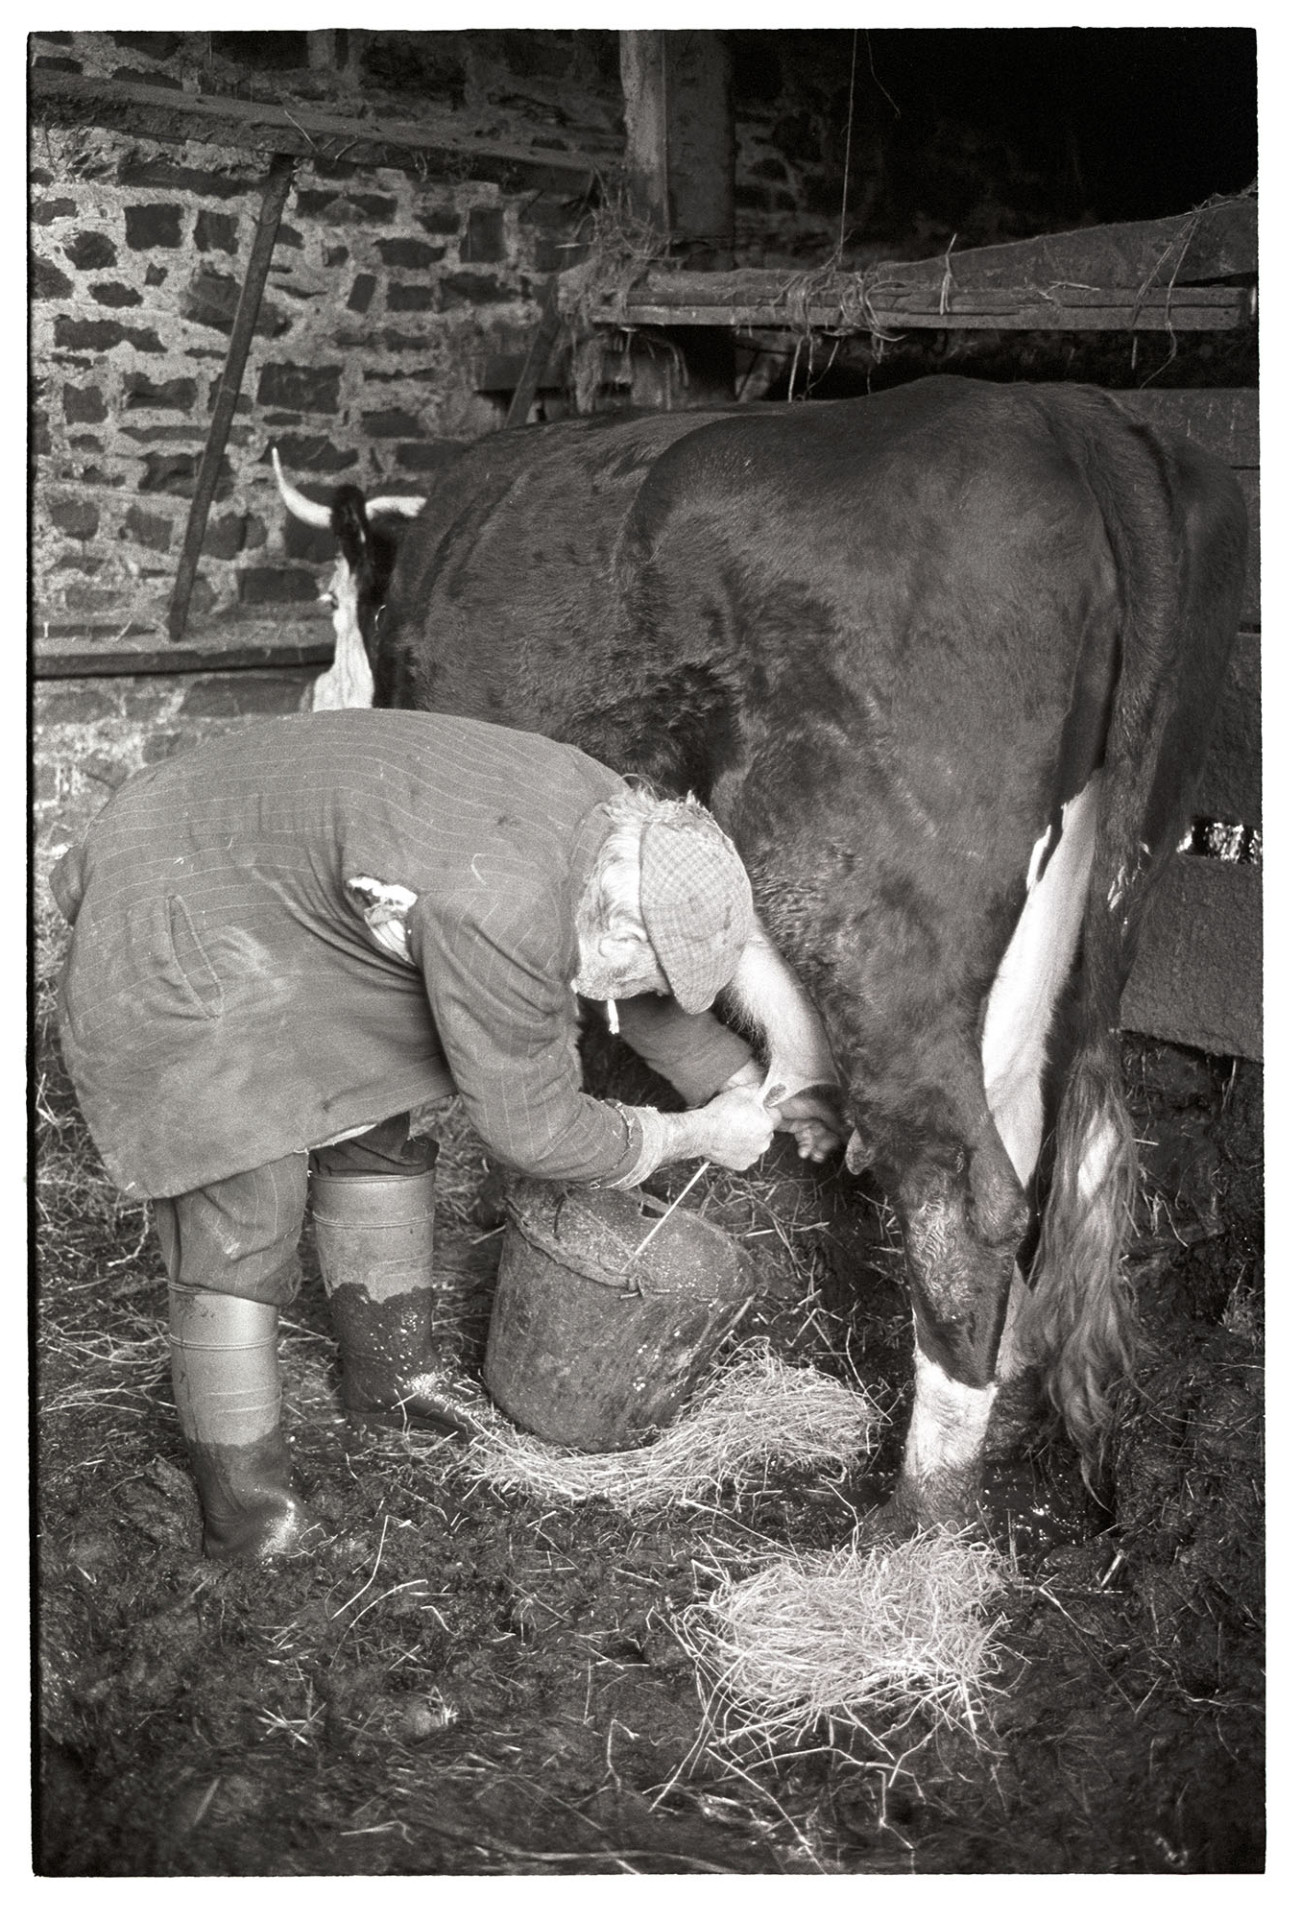 Farmer milking cow by hand. 
[Reg Holland milking a horned cow by hand in a mucky barn at Newhouse, Ashreigney. He is also smoking a cigarette.]